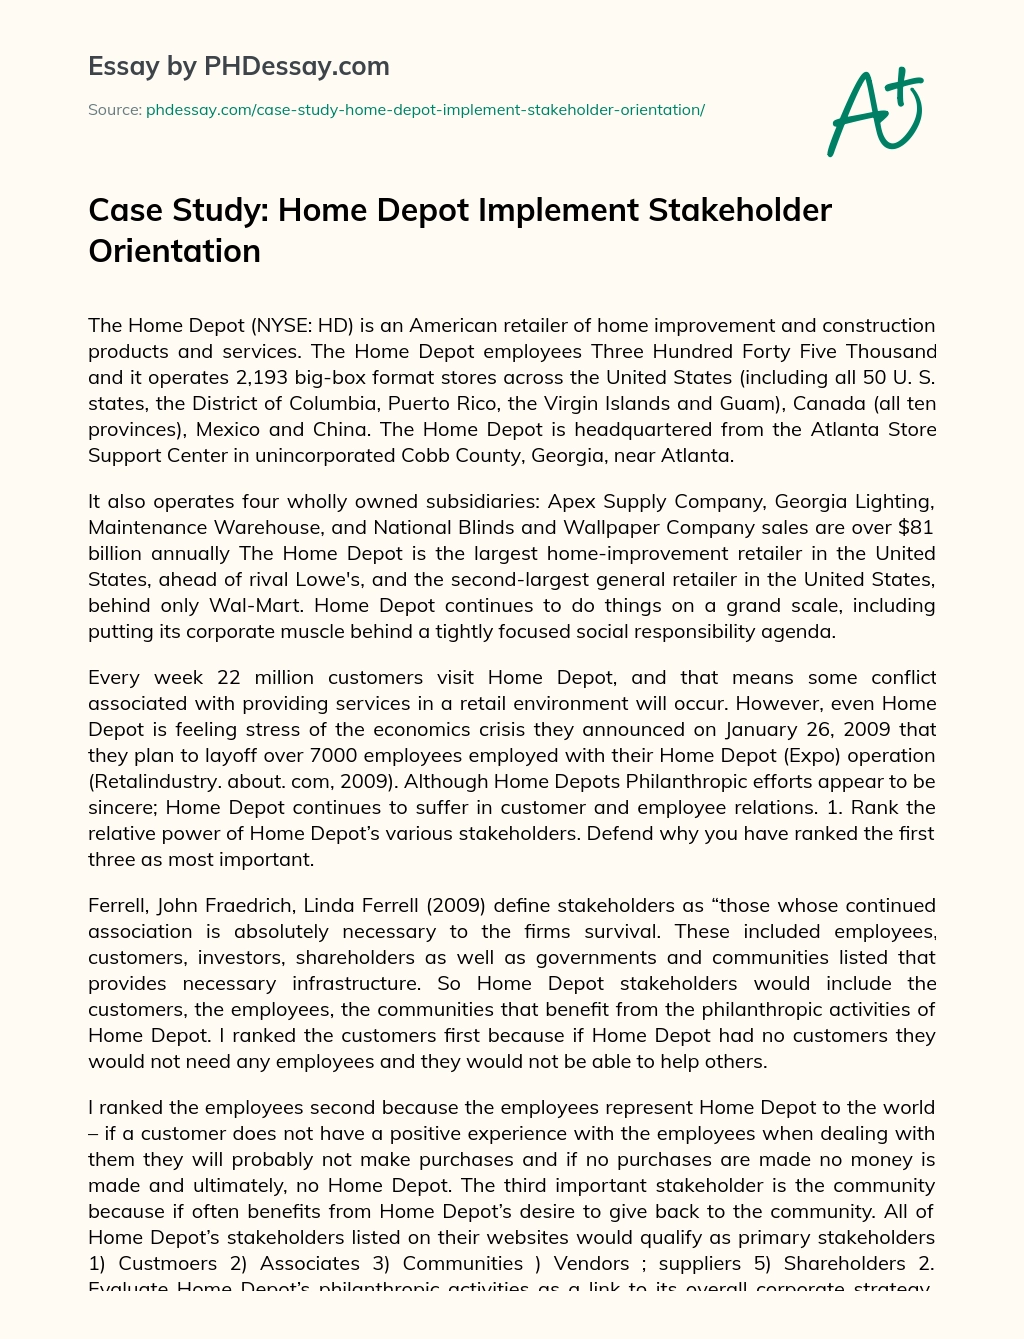 Case Study: Home Depot Implement Stakeholder Orientation essay